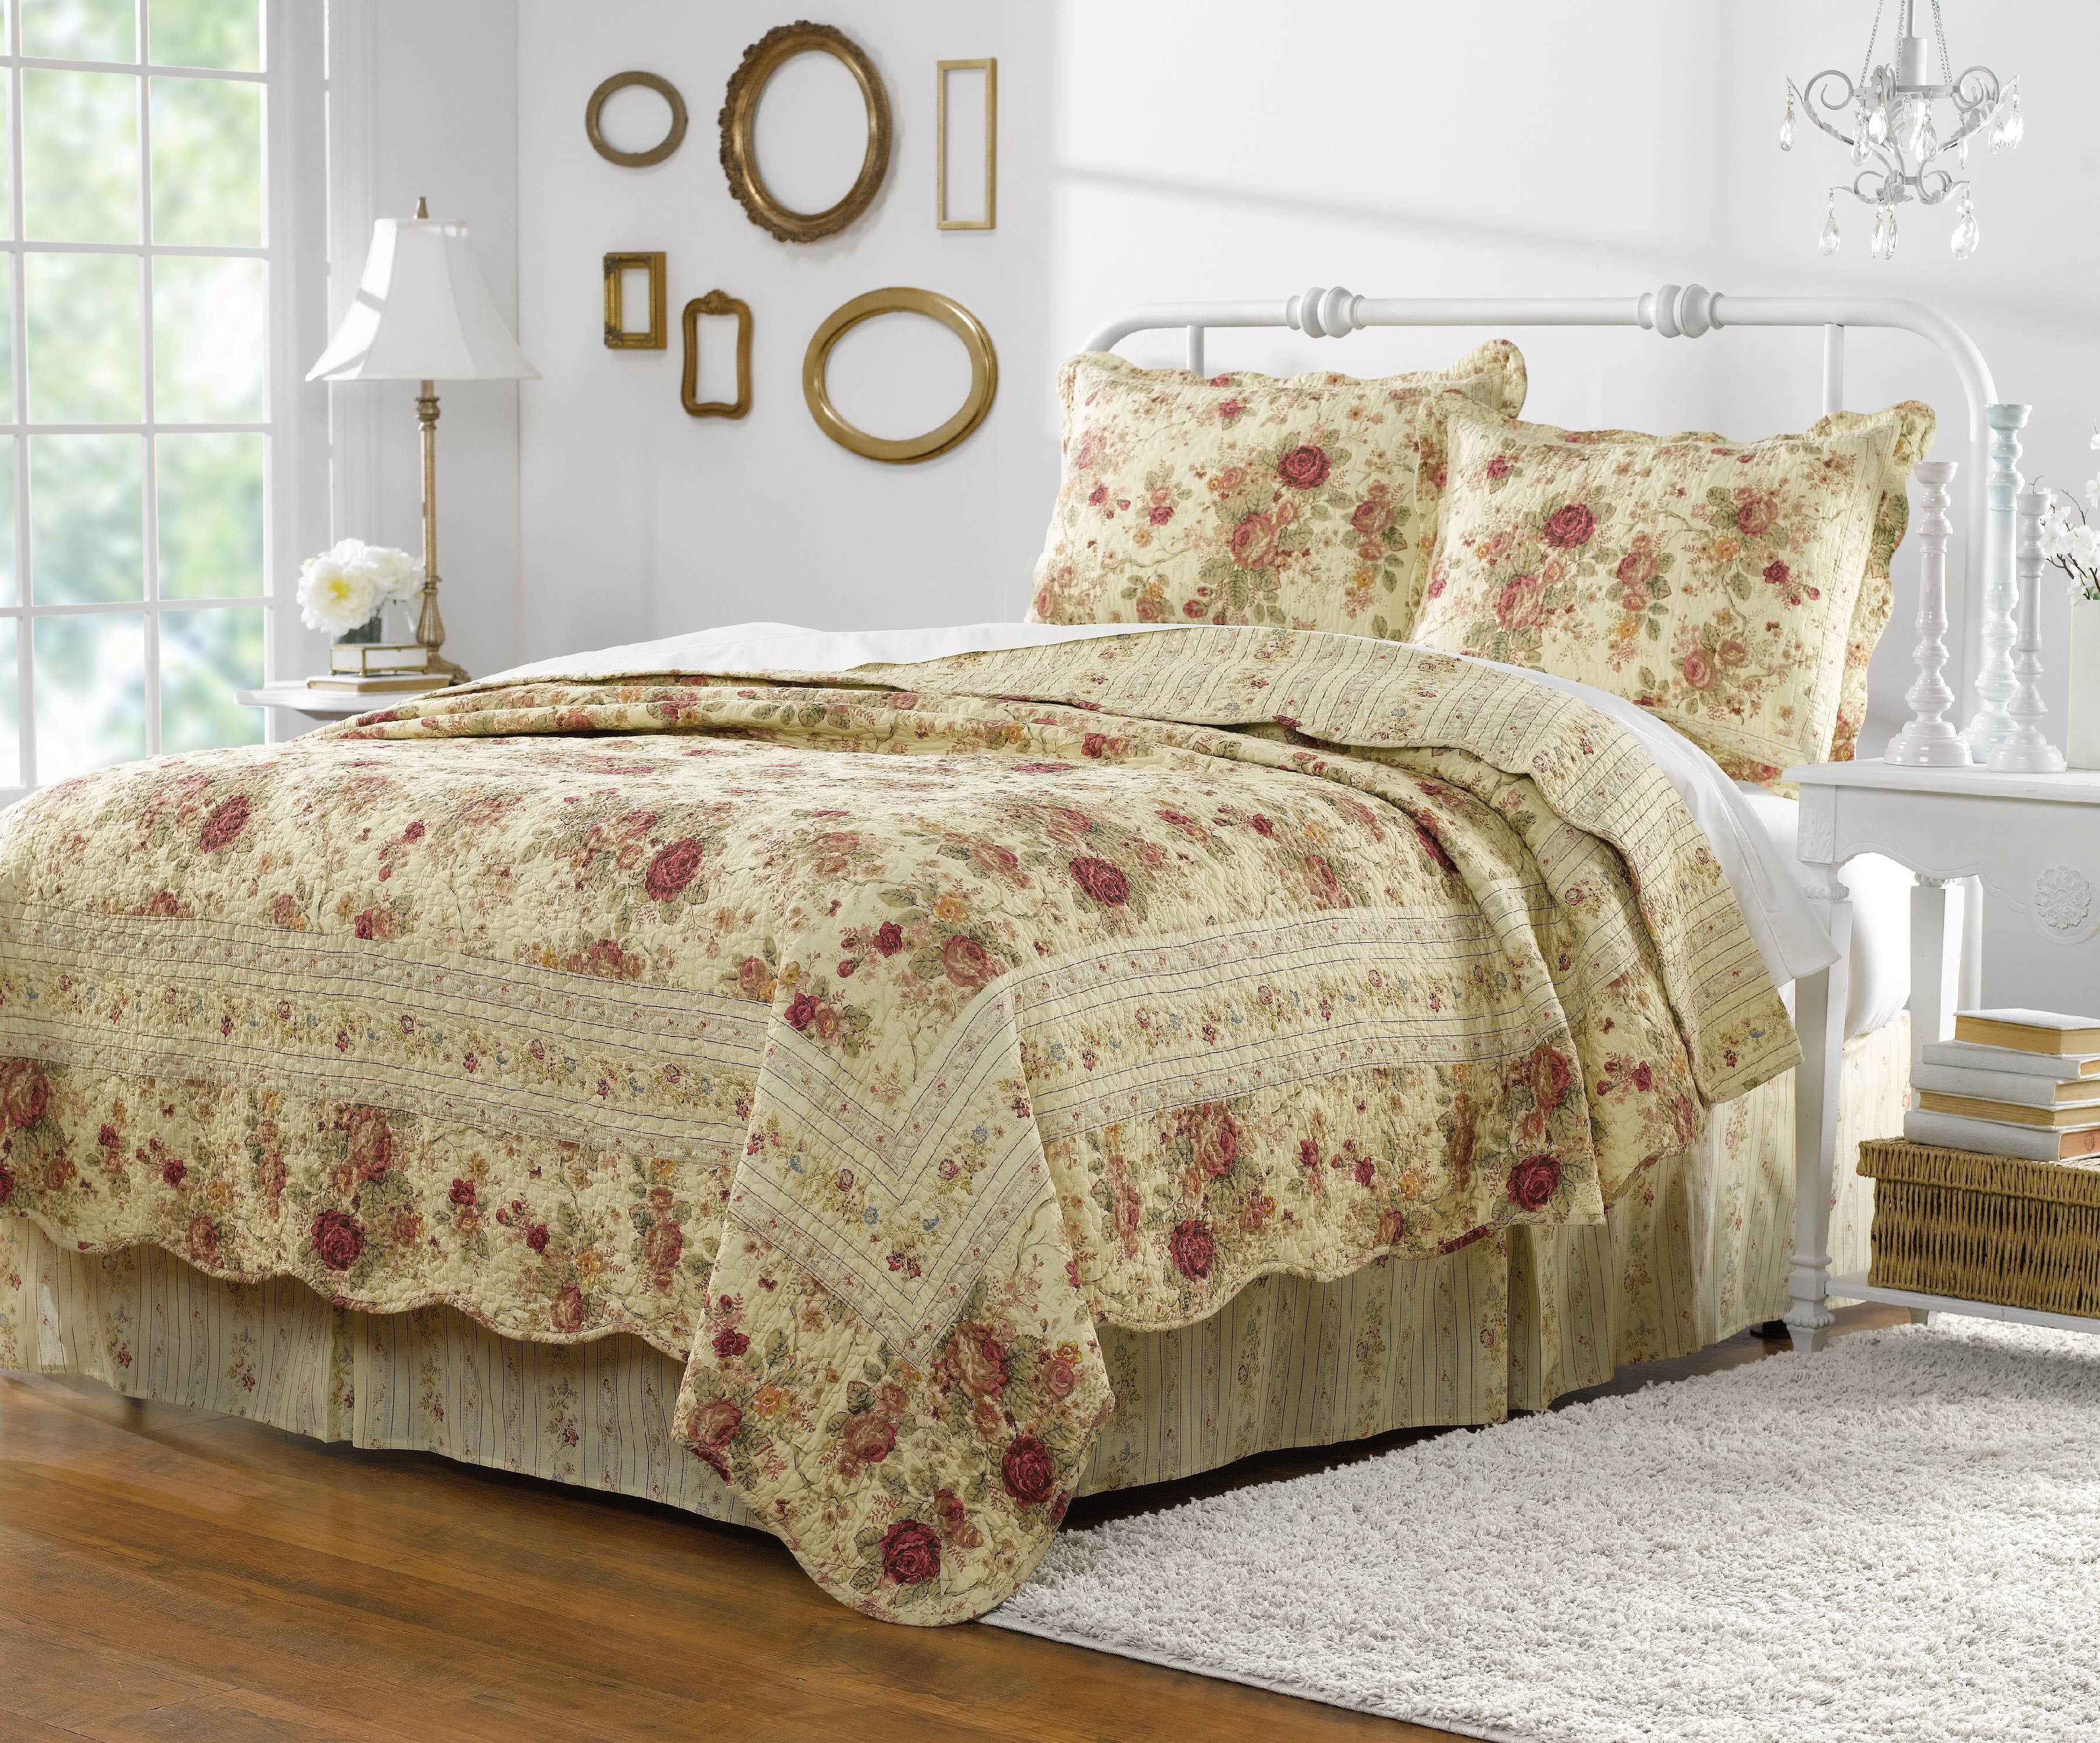 Greenland Home Fashions Antique Rose 100% Cotton Quilt and Pillow Sham Set, 2-Piece Twin/Twin XL